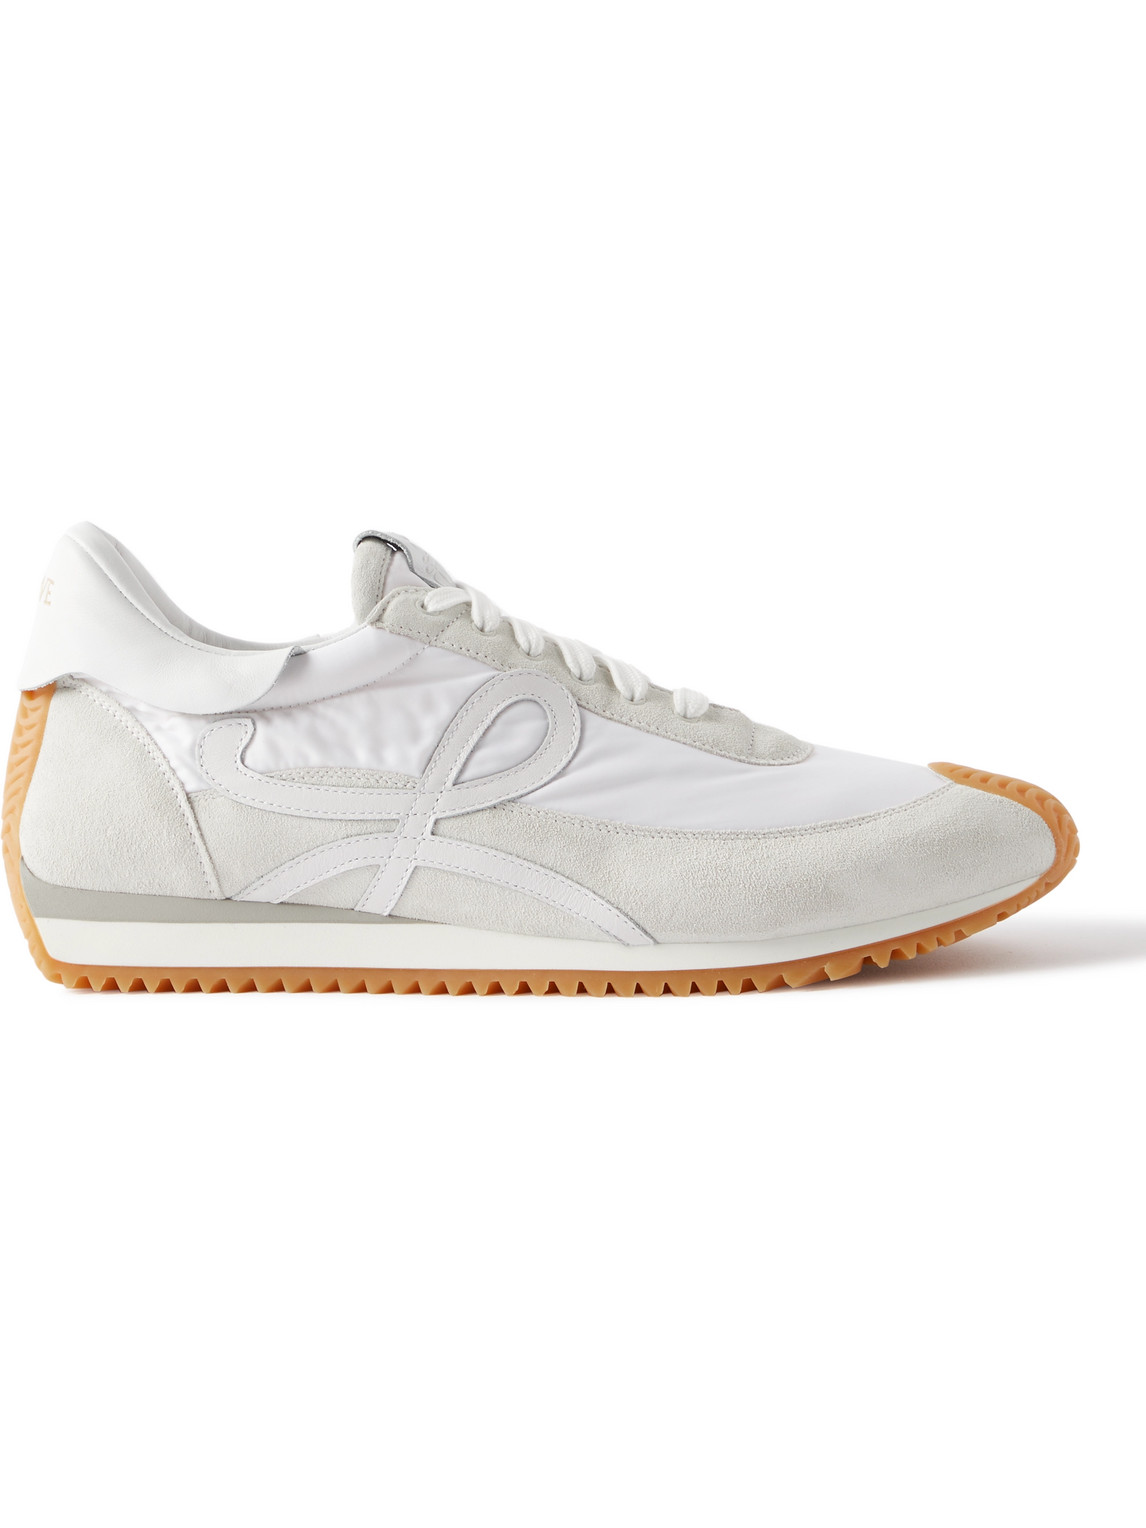 LOEWE FLOW RUNNER LEATHER-TRIMMED SUEDE AND NYLON SNEAKERS